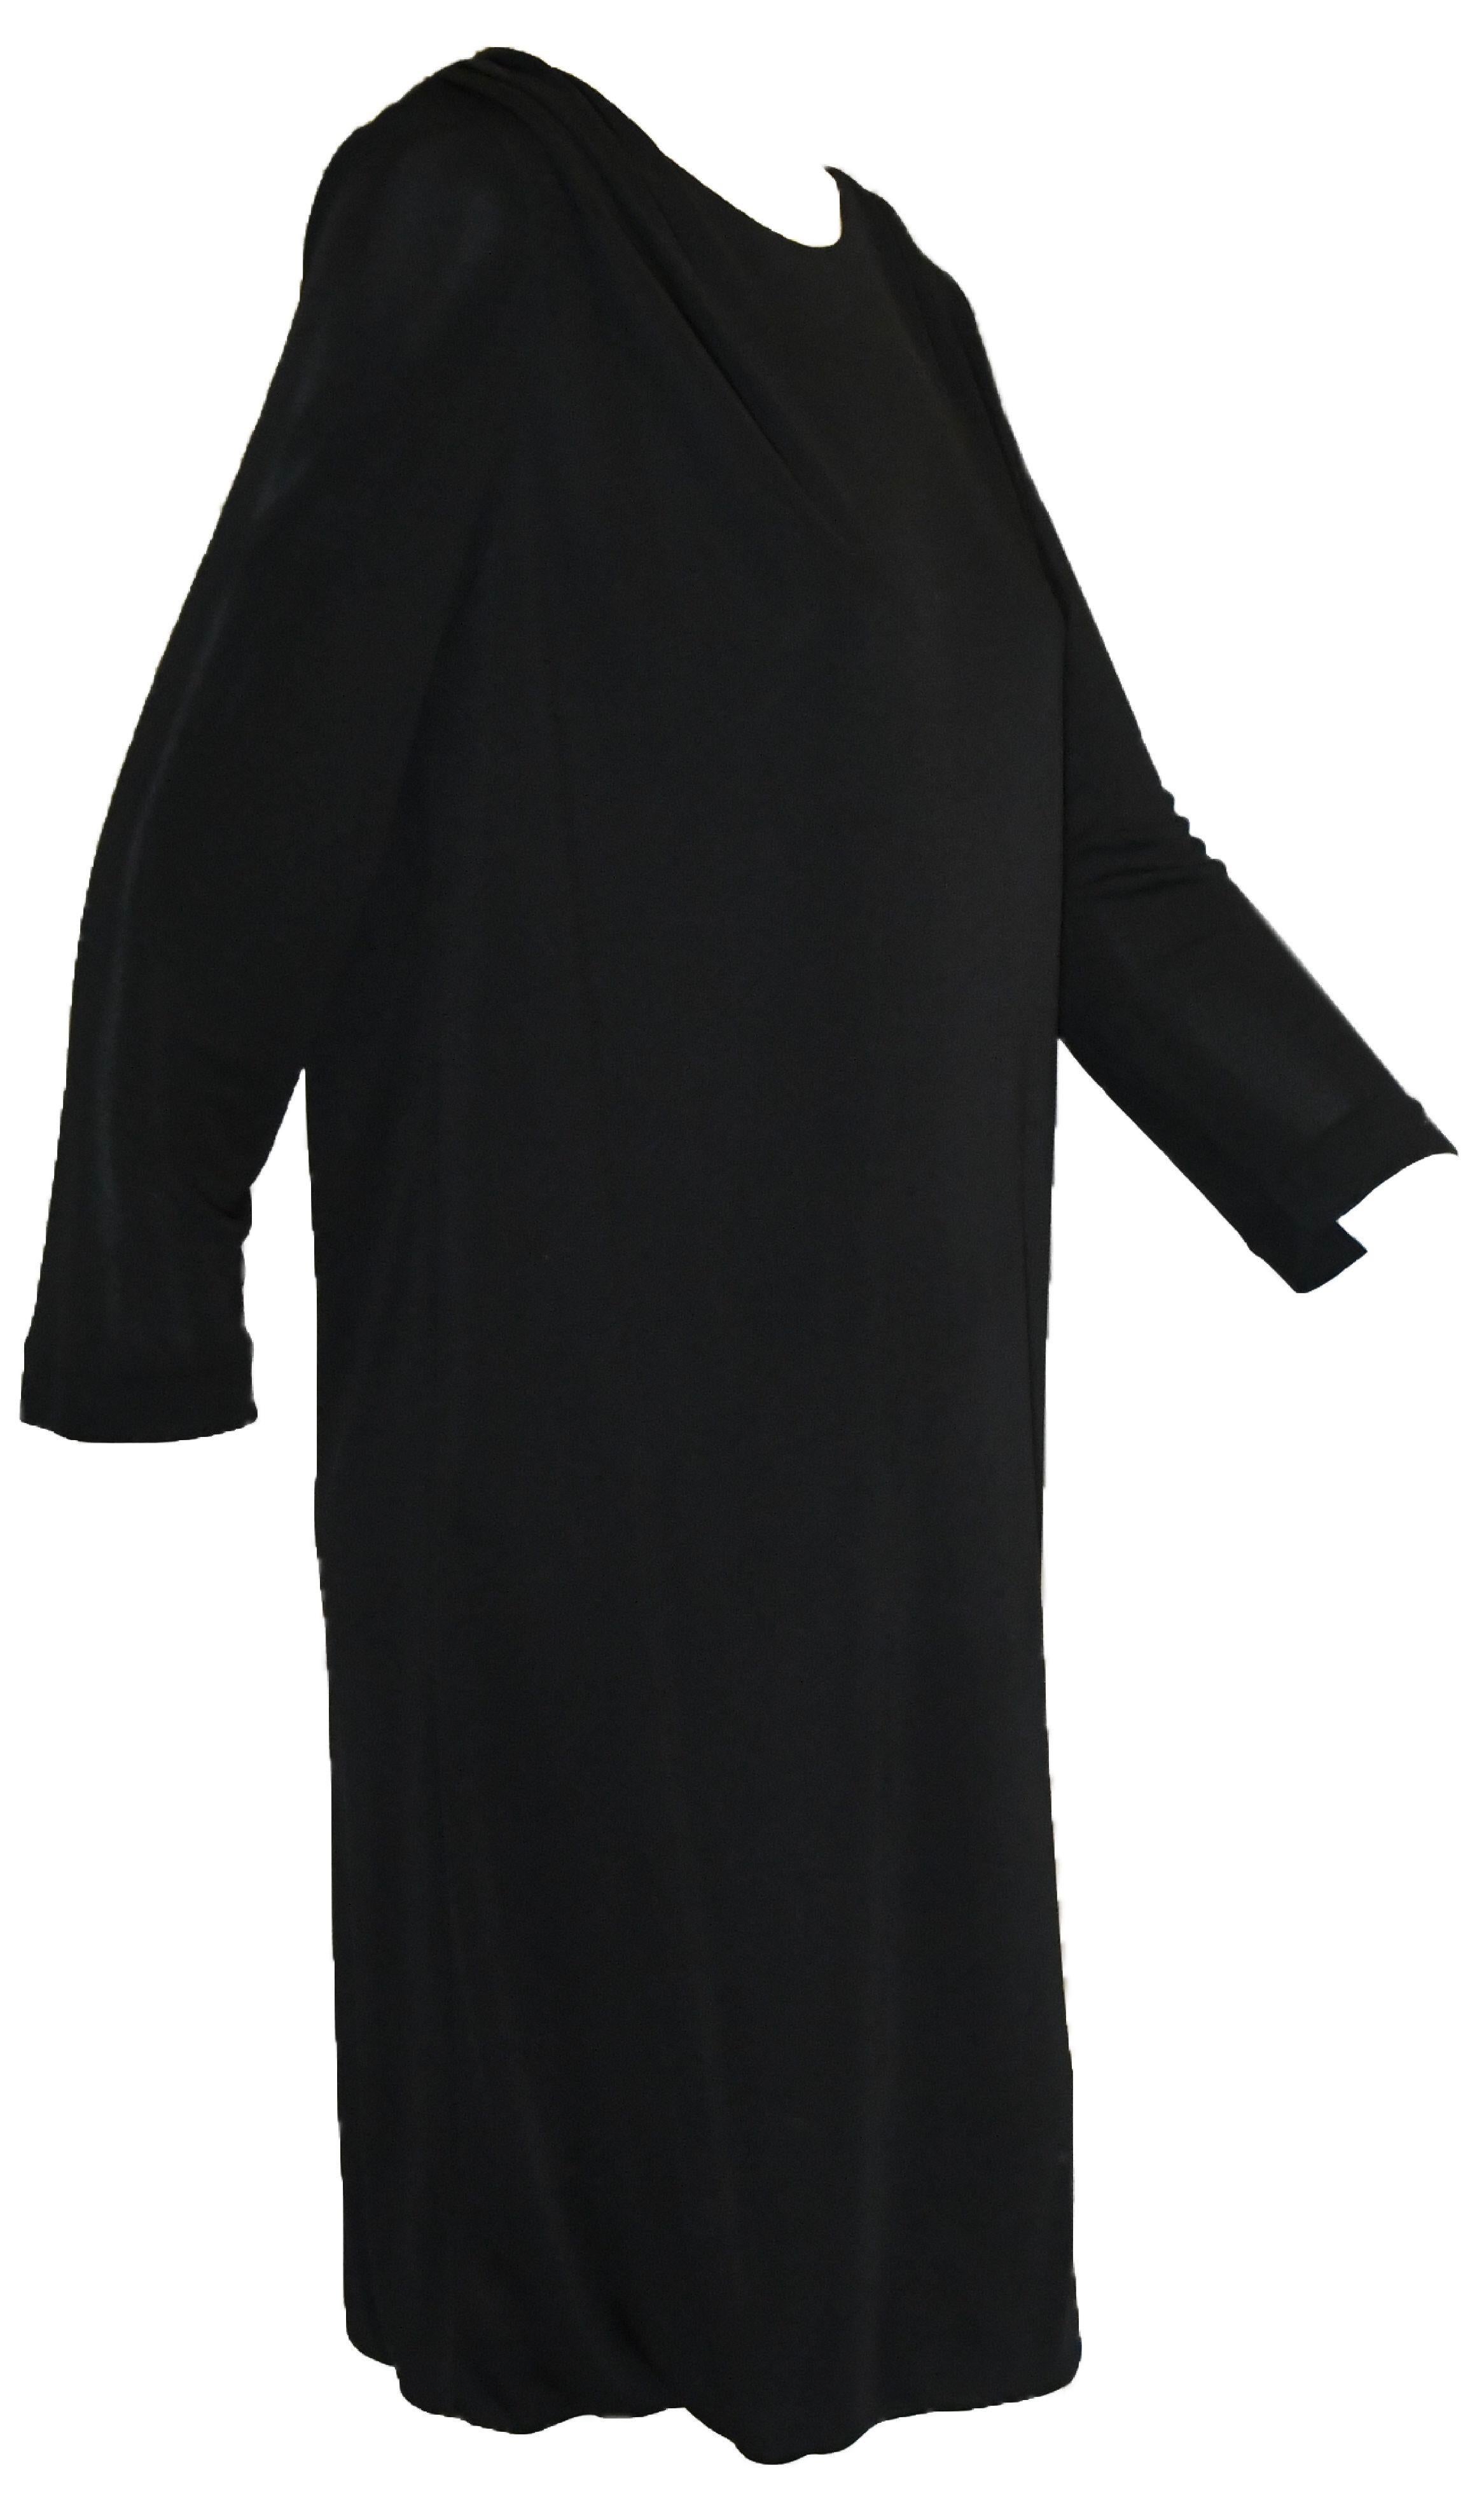 Emilio Pucci's Little Black Dress features exquisite 100% Viscose fabric.  Features 3/4 sleeves and gathered shoulders defined by small pleats.  This comfortable, easy-to-wear dress is the perfect traveling companion. and a must-have for any